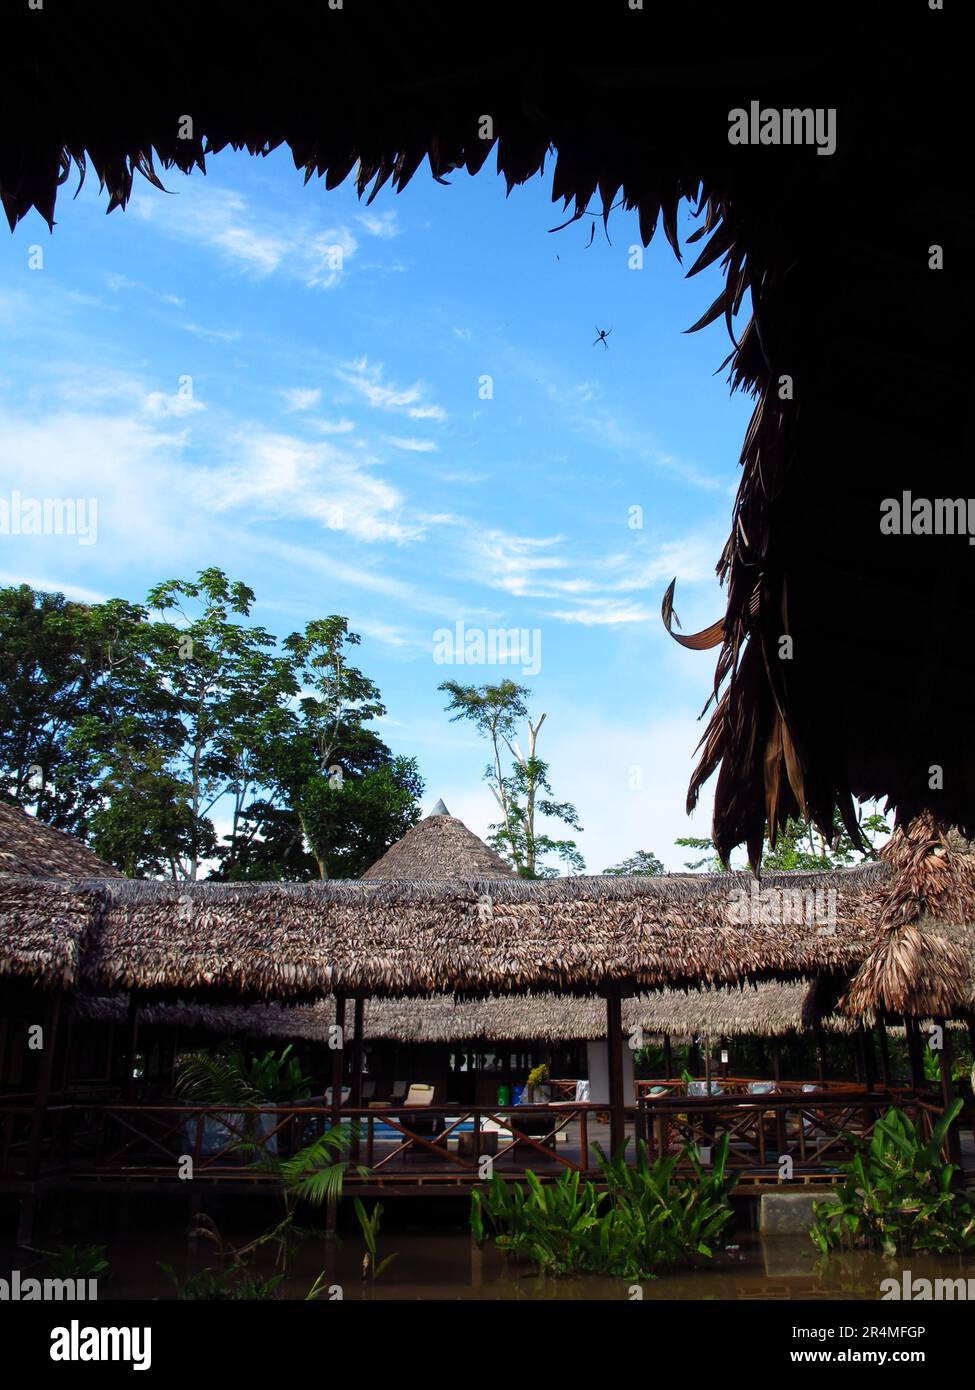 The spider in the lodge on Amazon river in Peru Stock Photo